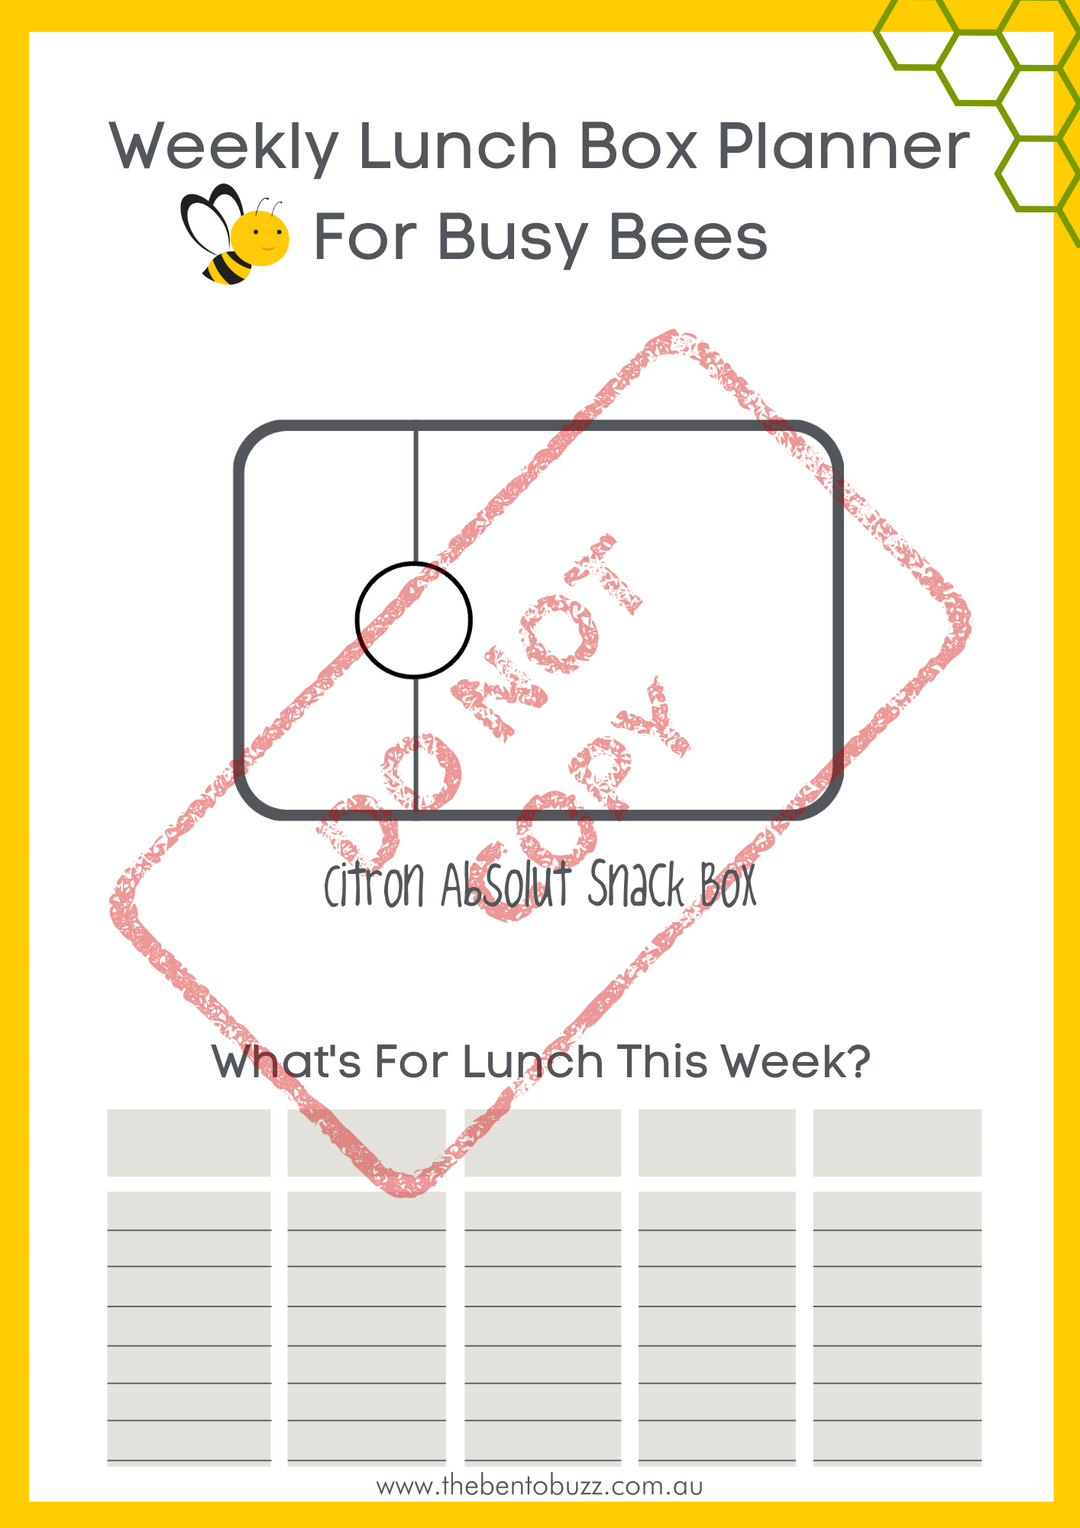 Download & Print Lunch Box Planner - Citron Absolut Snack